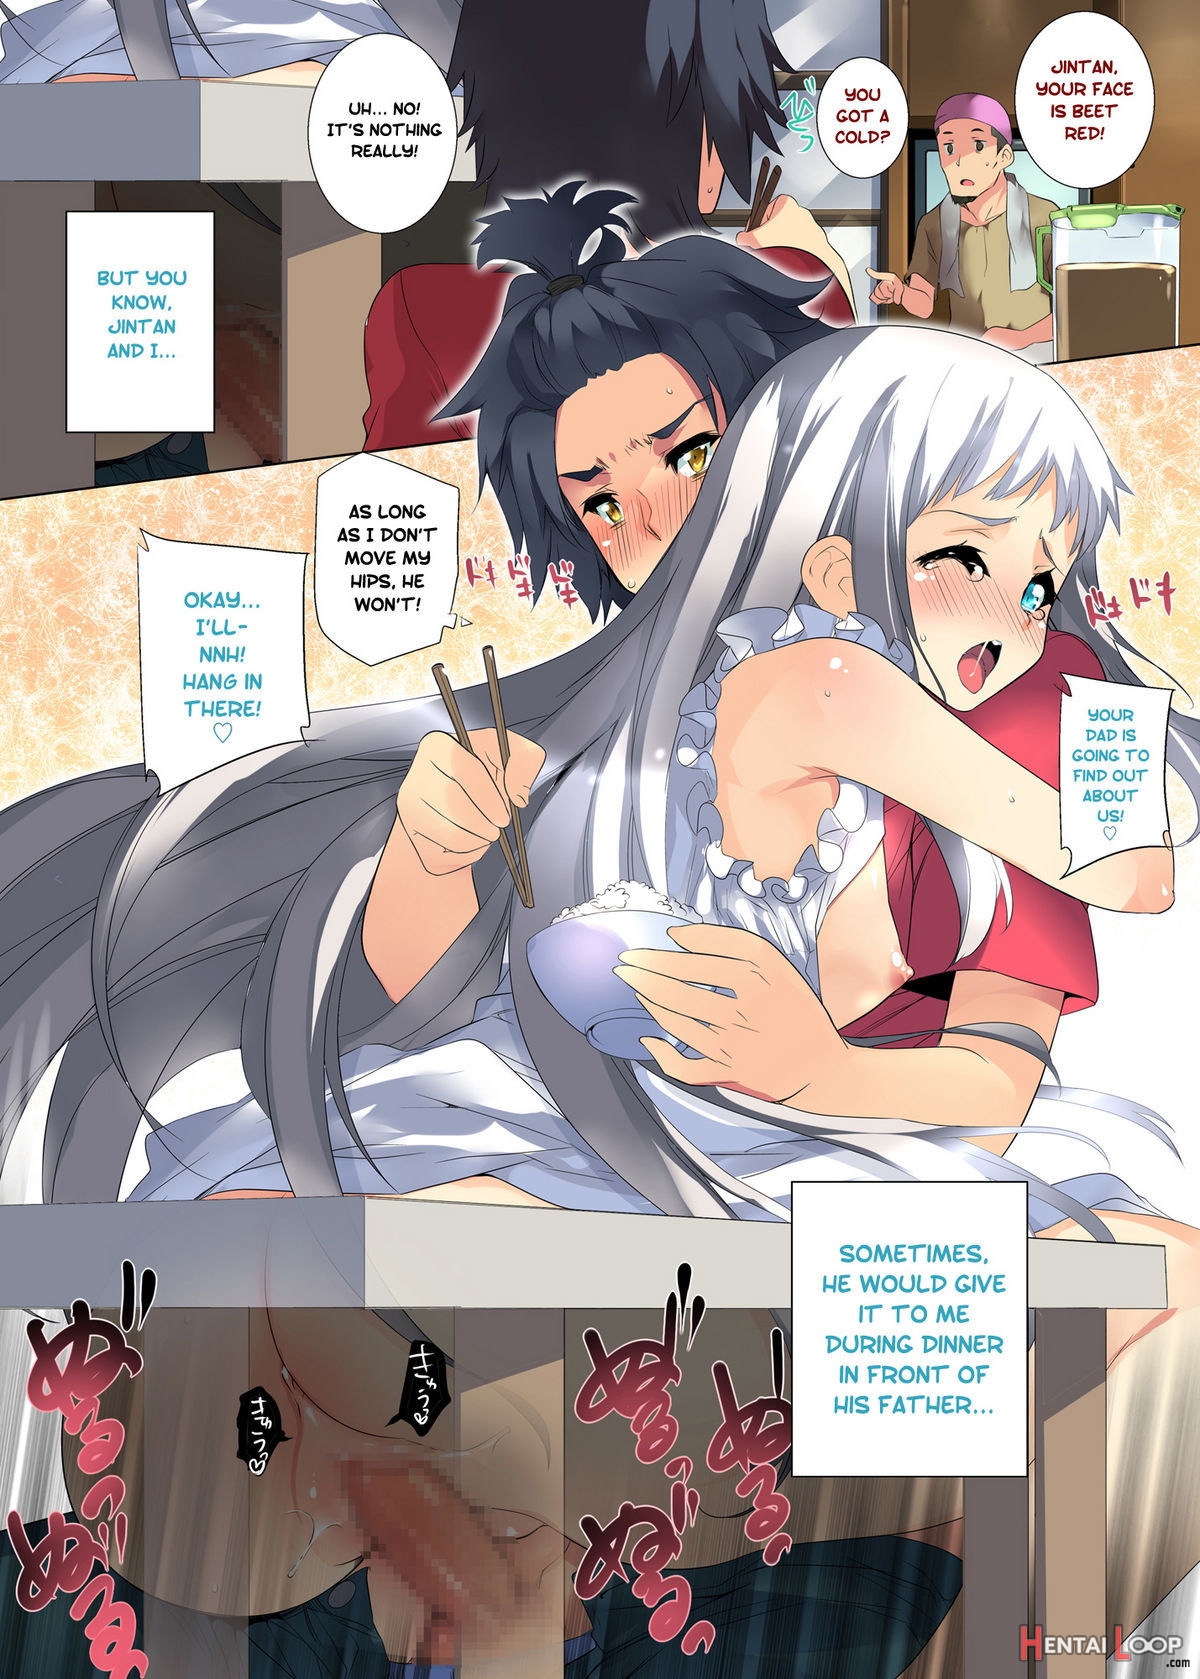 Anaru Caught Me Doing It With Menmaâ€¦ But I Don't Care Anymore page 4